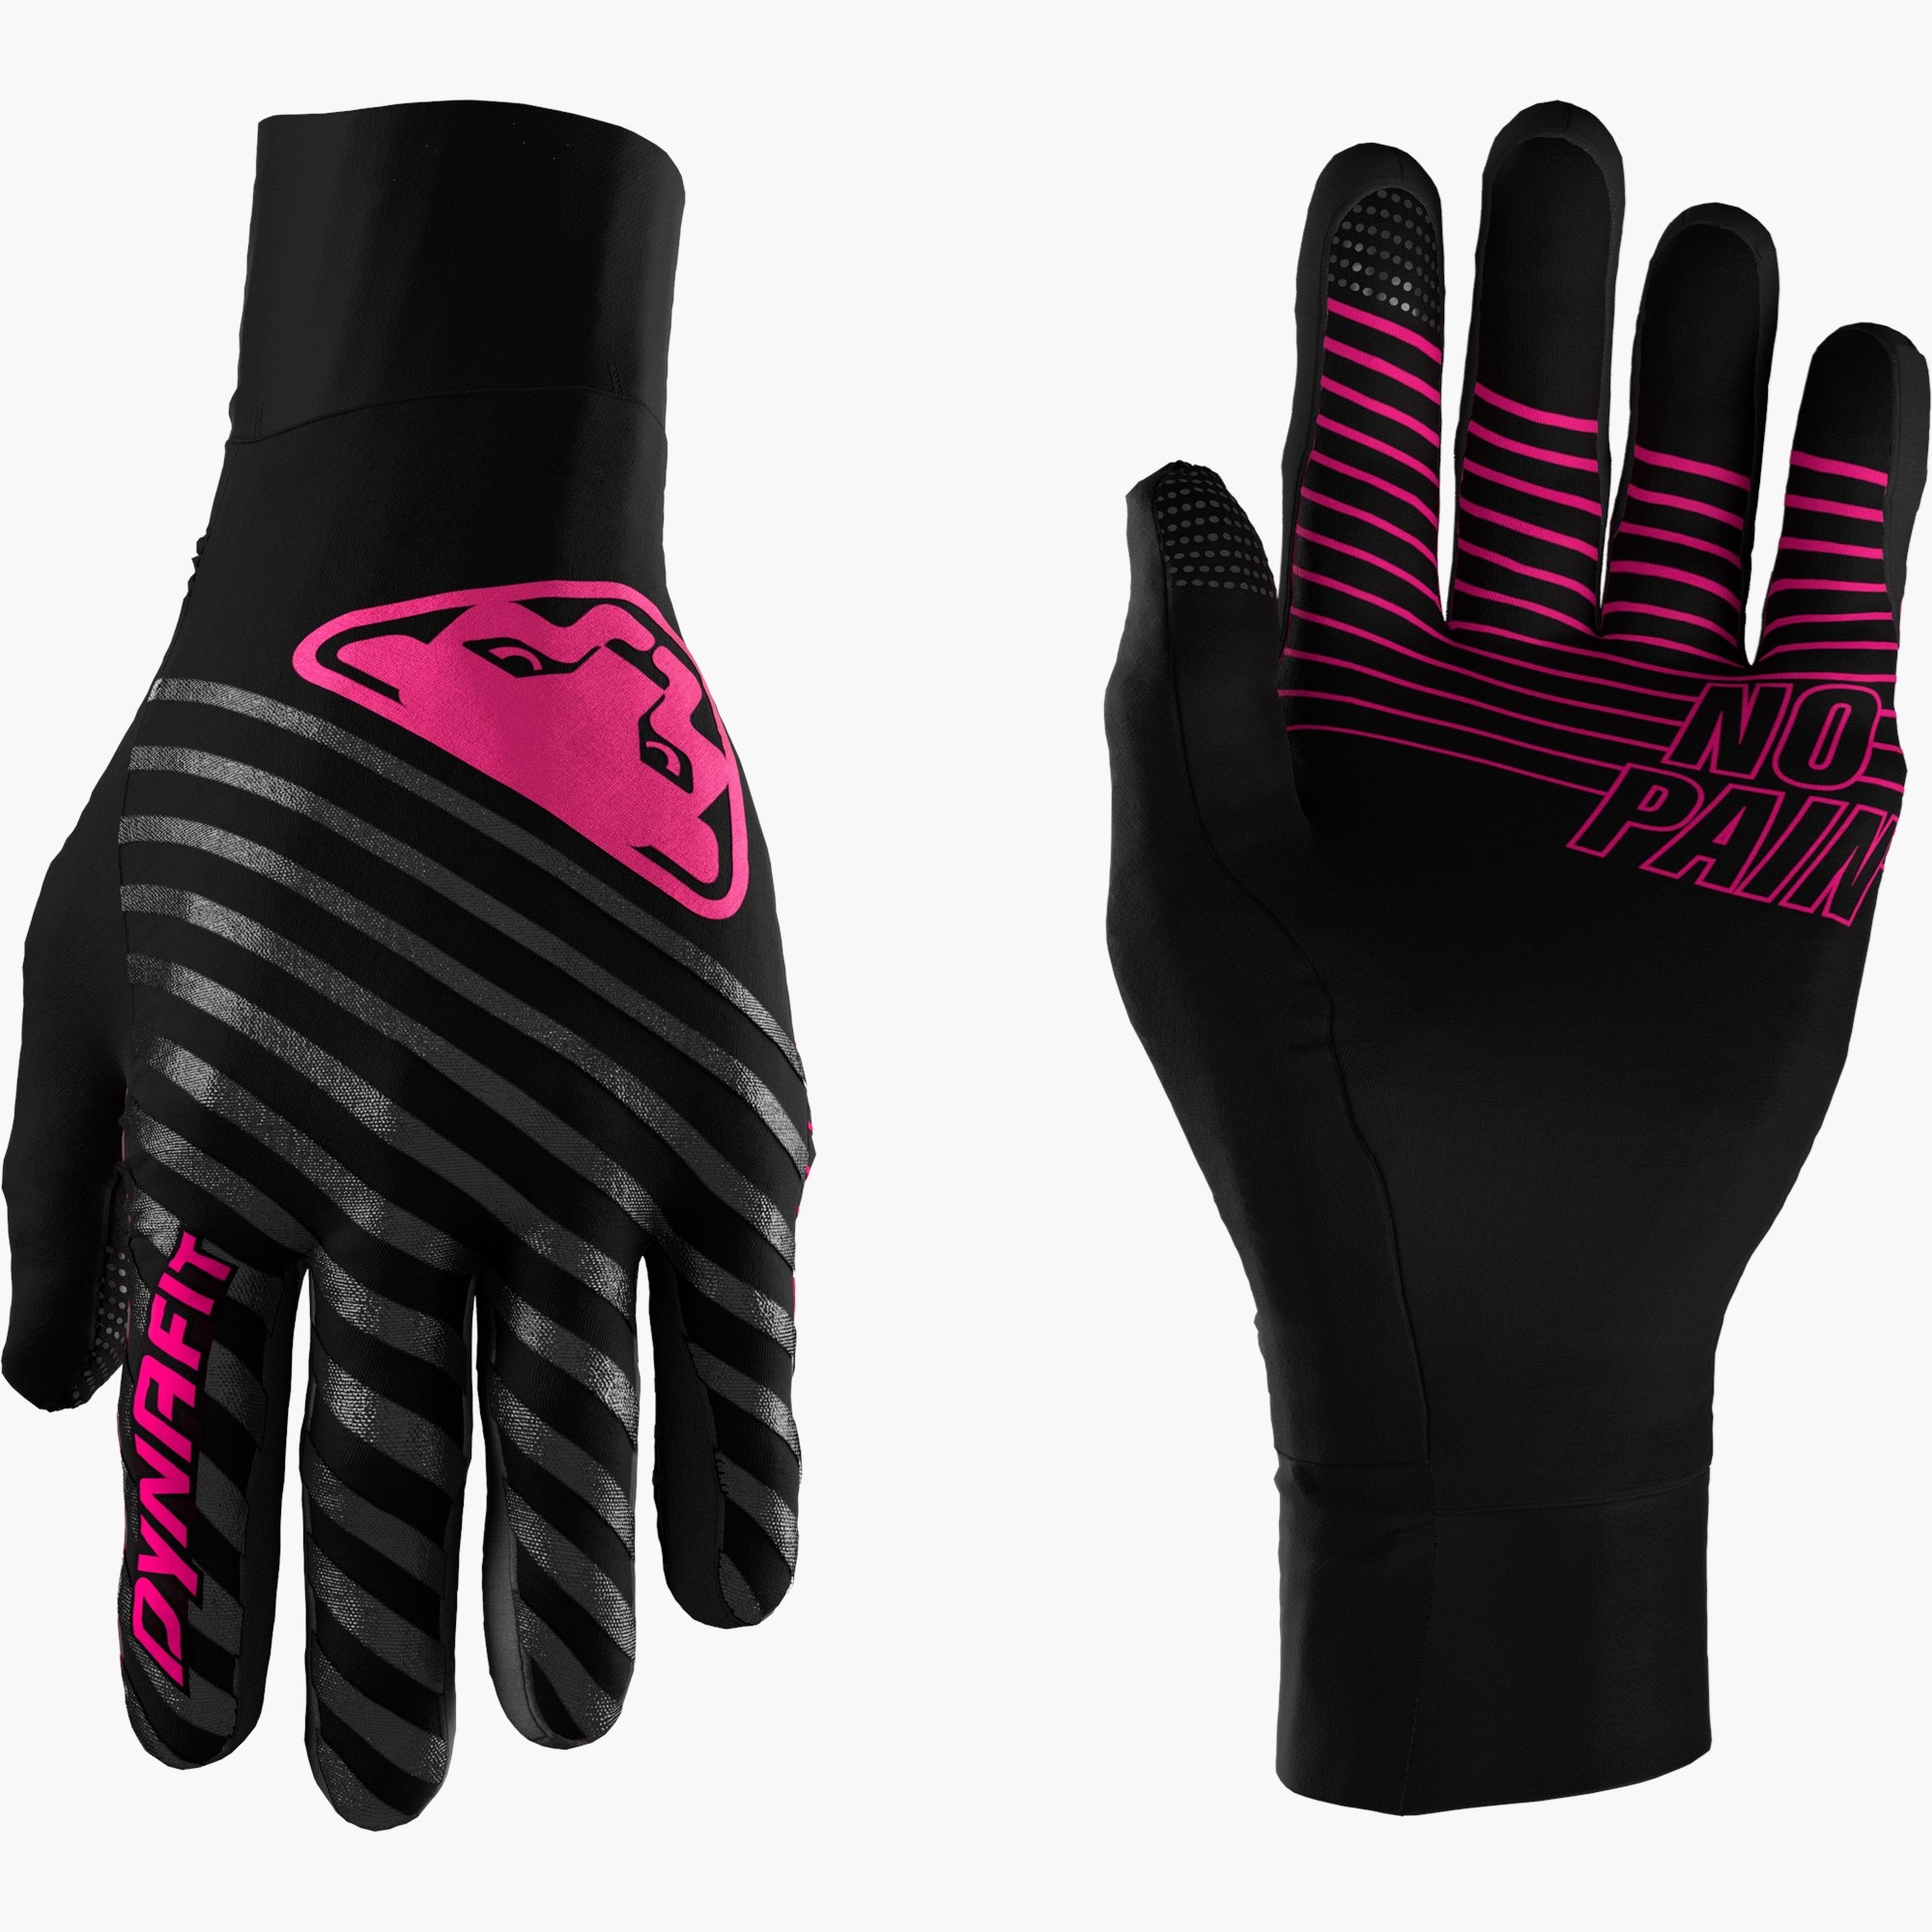 Black out pink glo/6070_0912